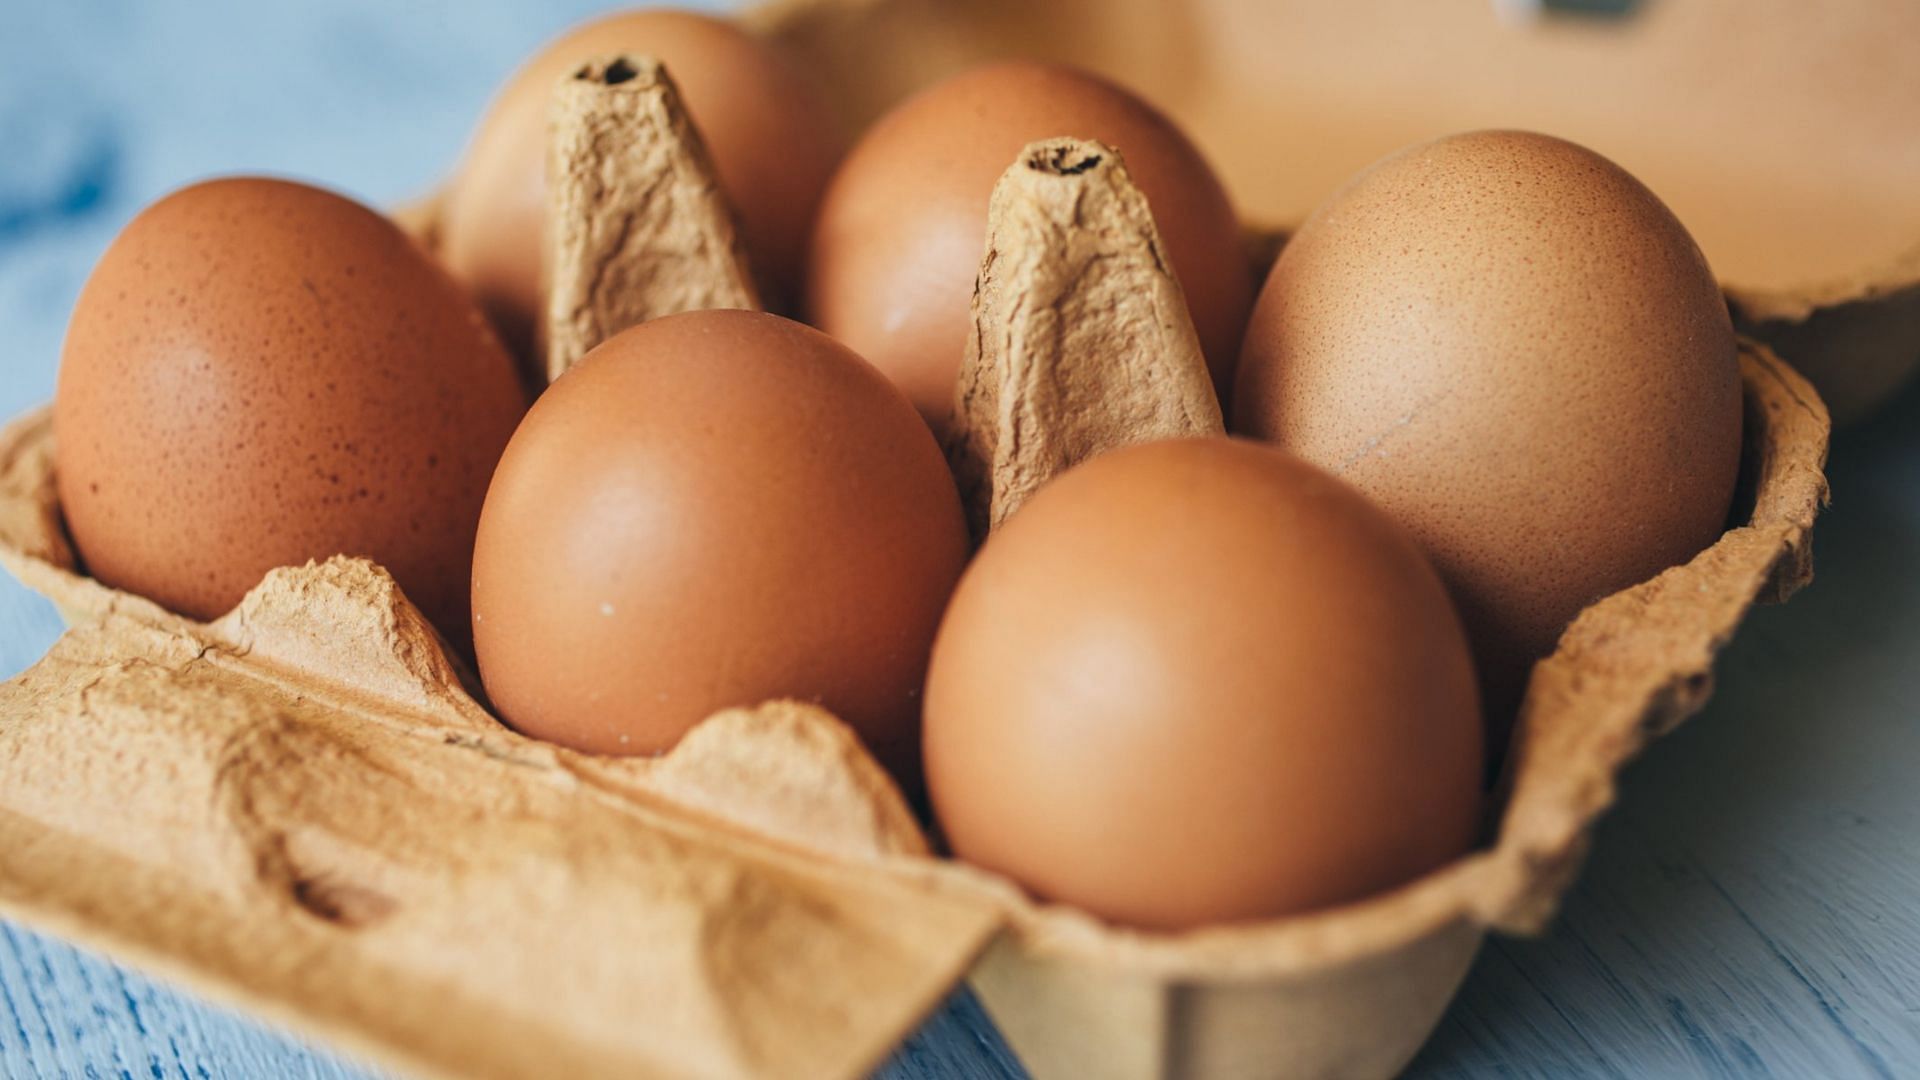 a carton of brown eggs now costs up to 138% more amidst the rising egg prices (Image via Nacho Mena/Getty Images)